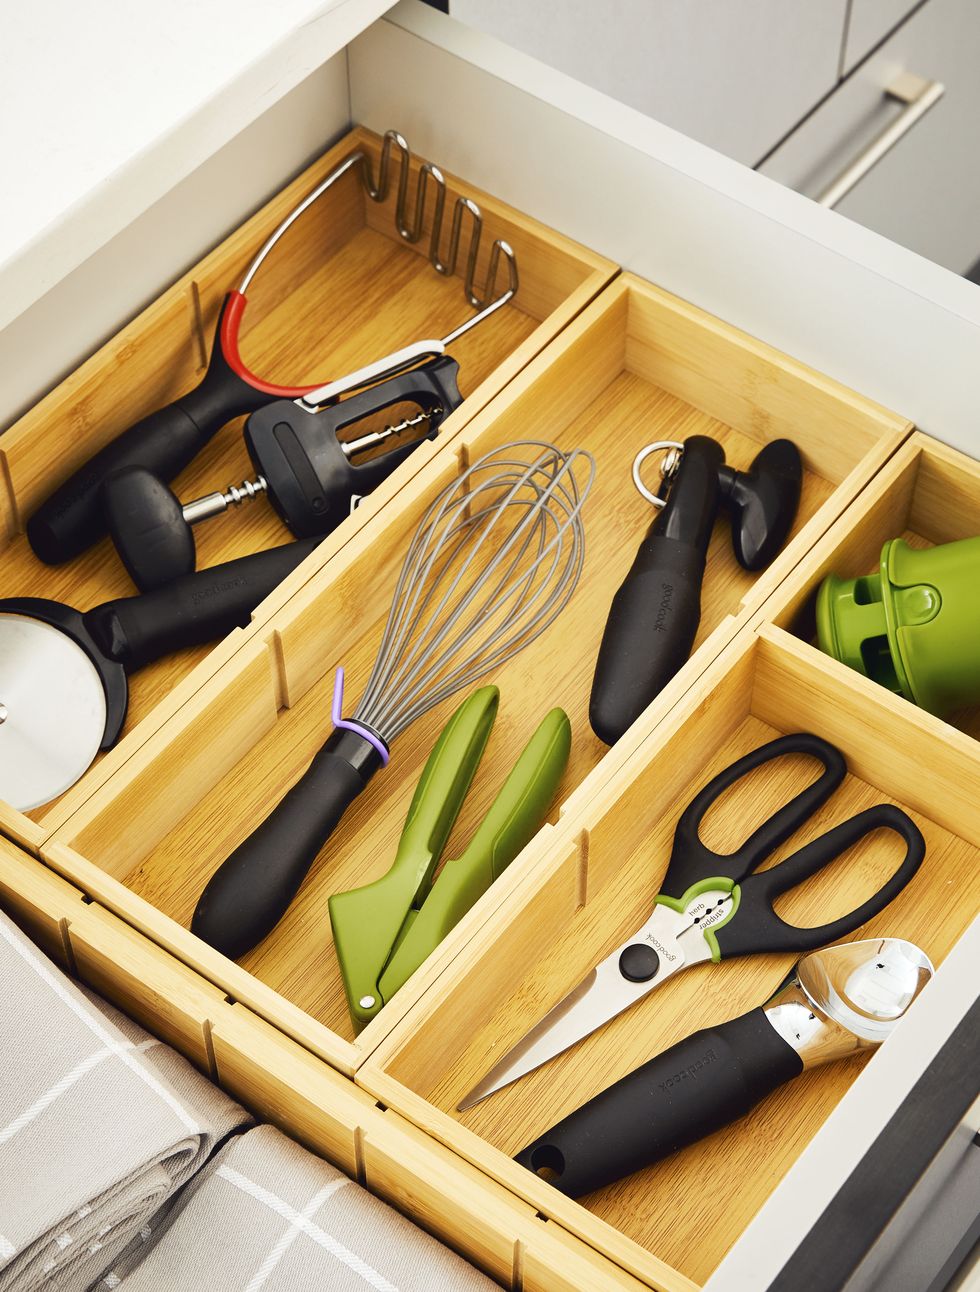 drawer full of kitchen accessories